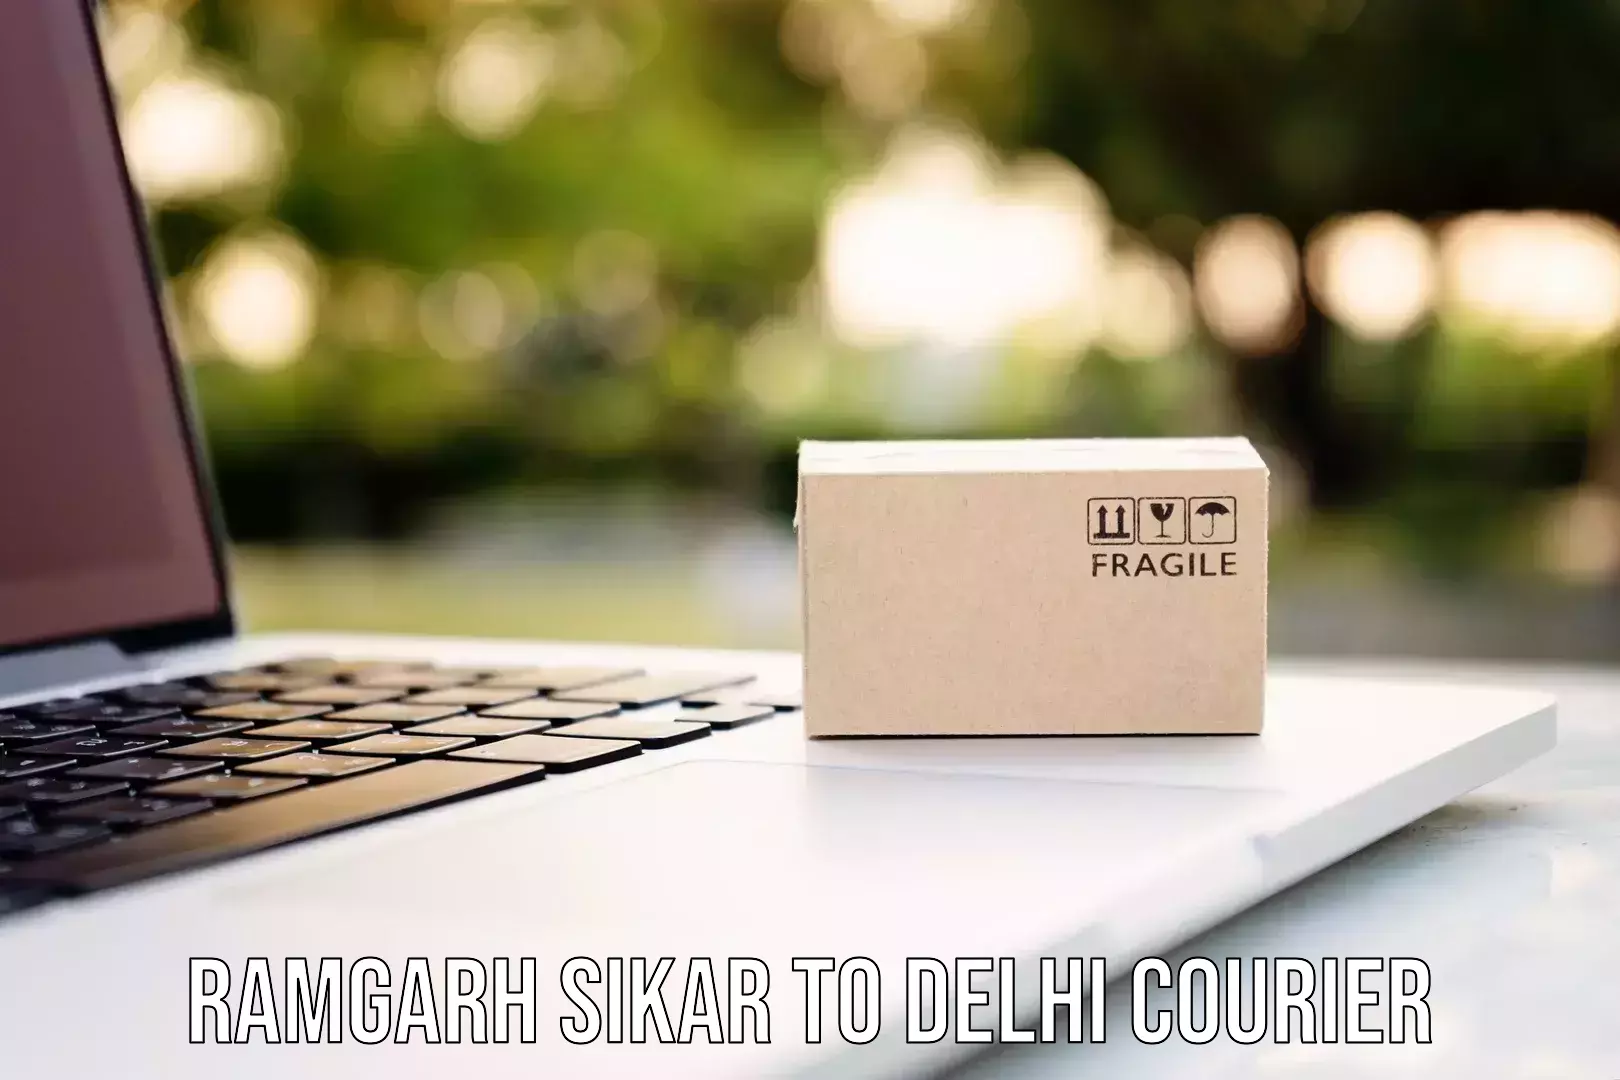 End-to-end delivery Ramgarh Sikar to Delhi Technological University DTU